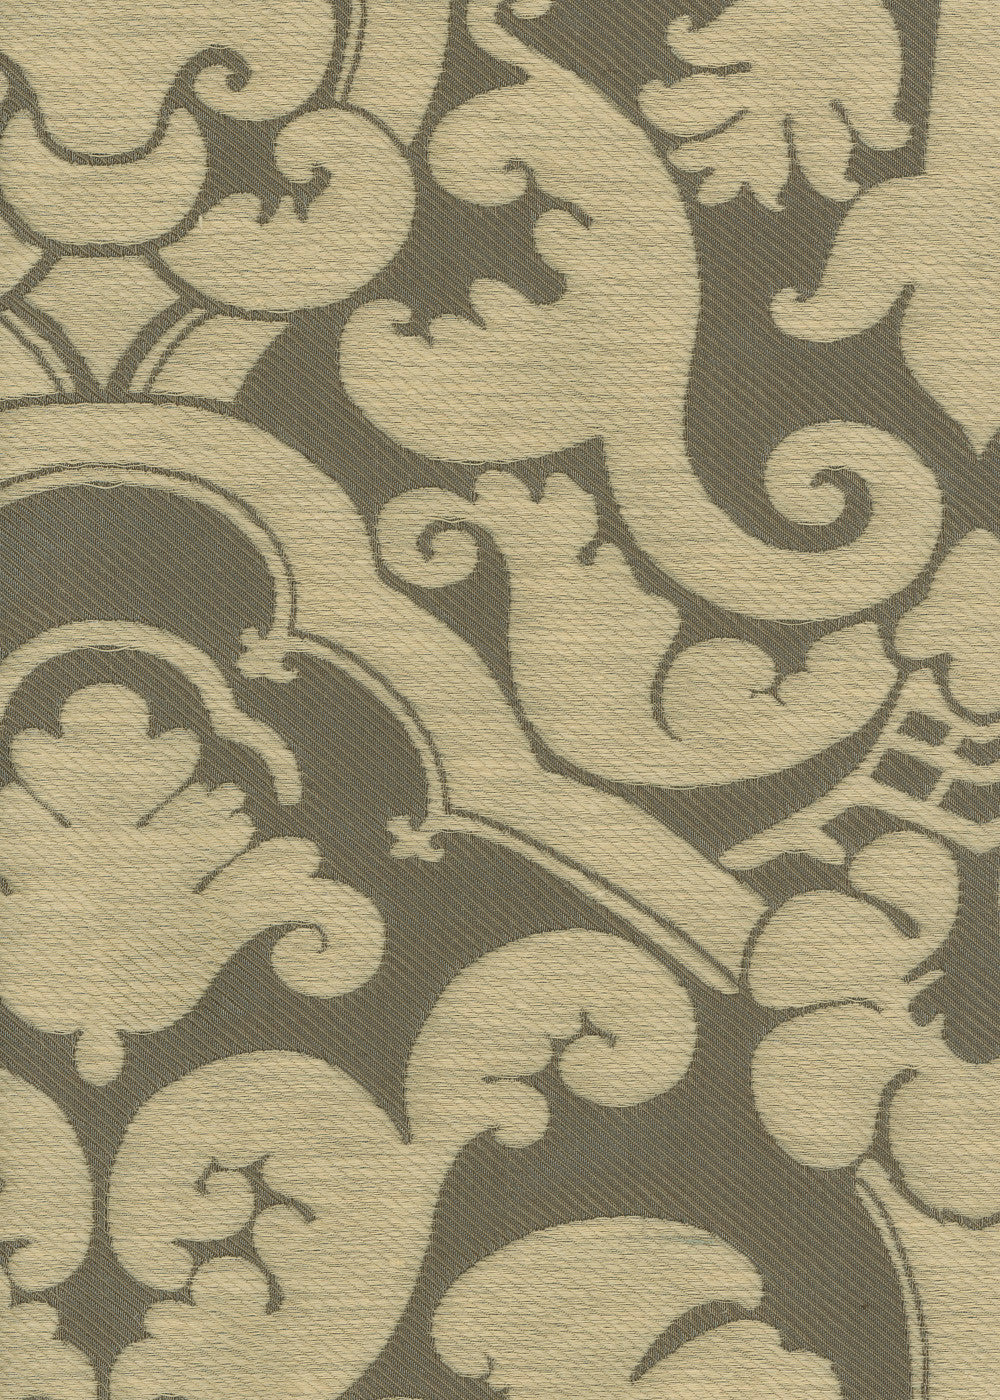 grey and cream fabric with a woven damask design